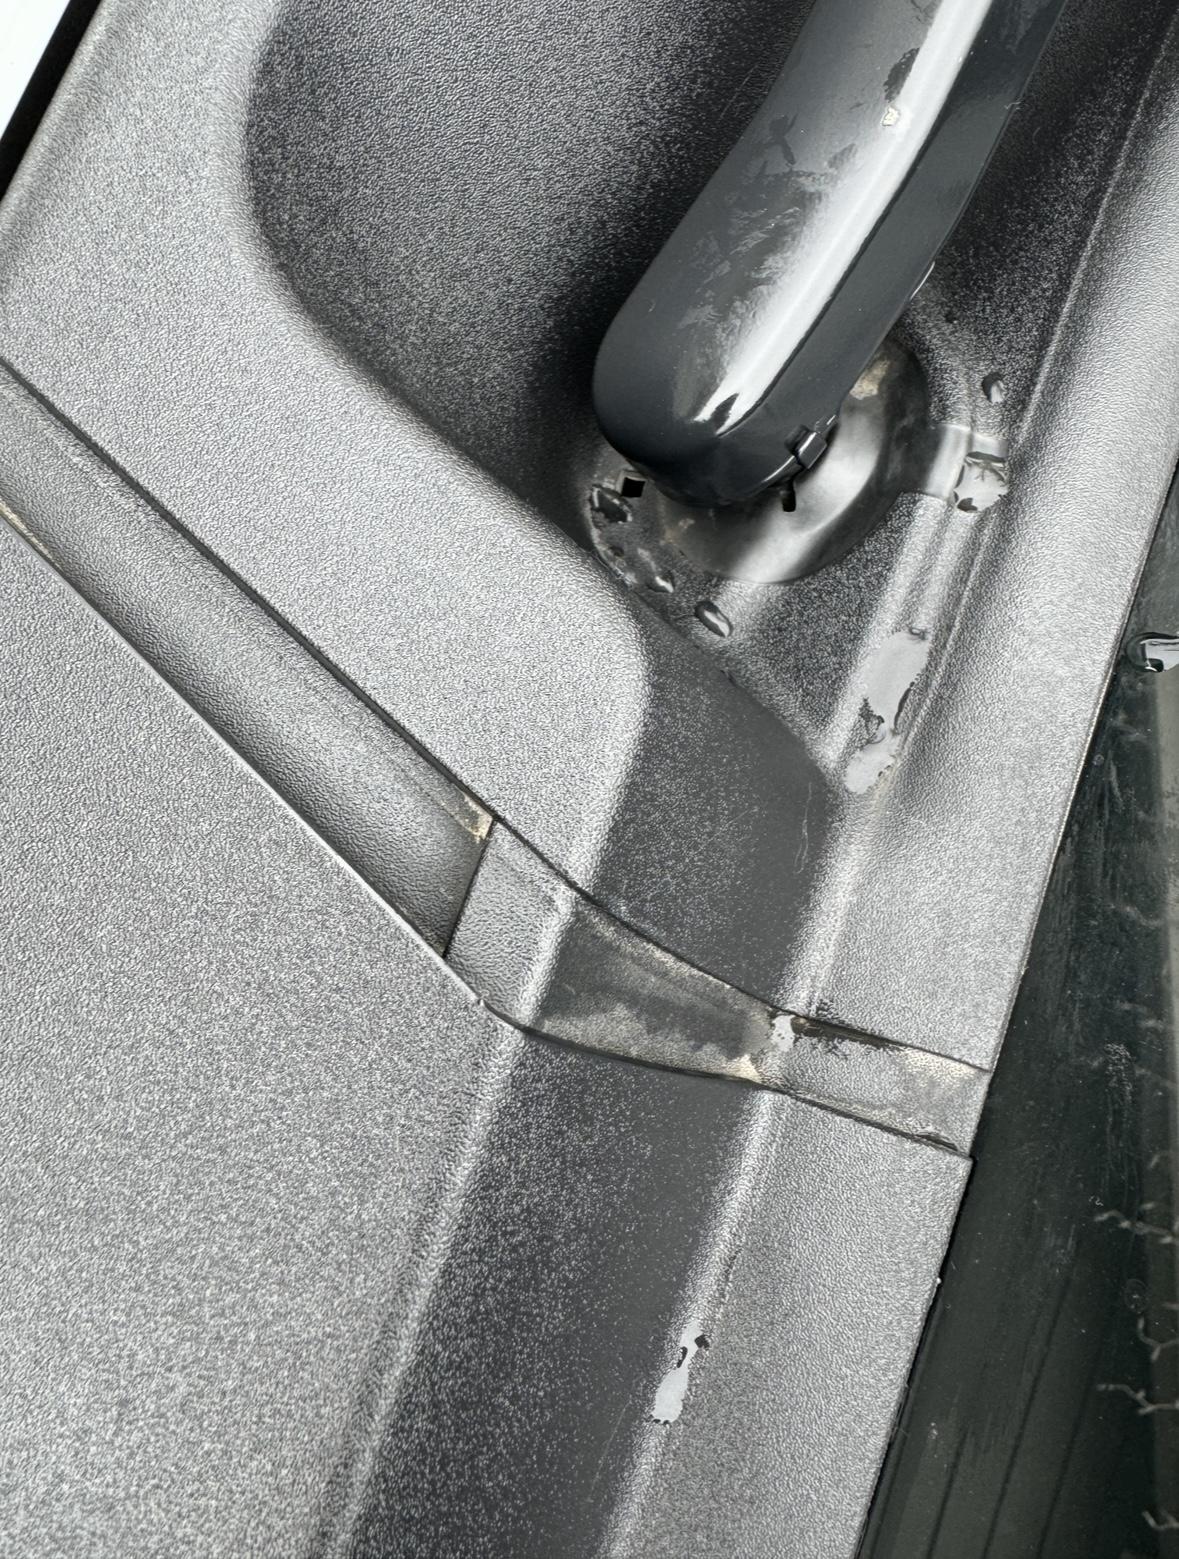 Ford F-150 Lightning Does this gap in the center of the wiper plastic trim seem normal? IMG_1777